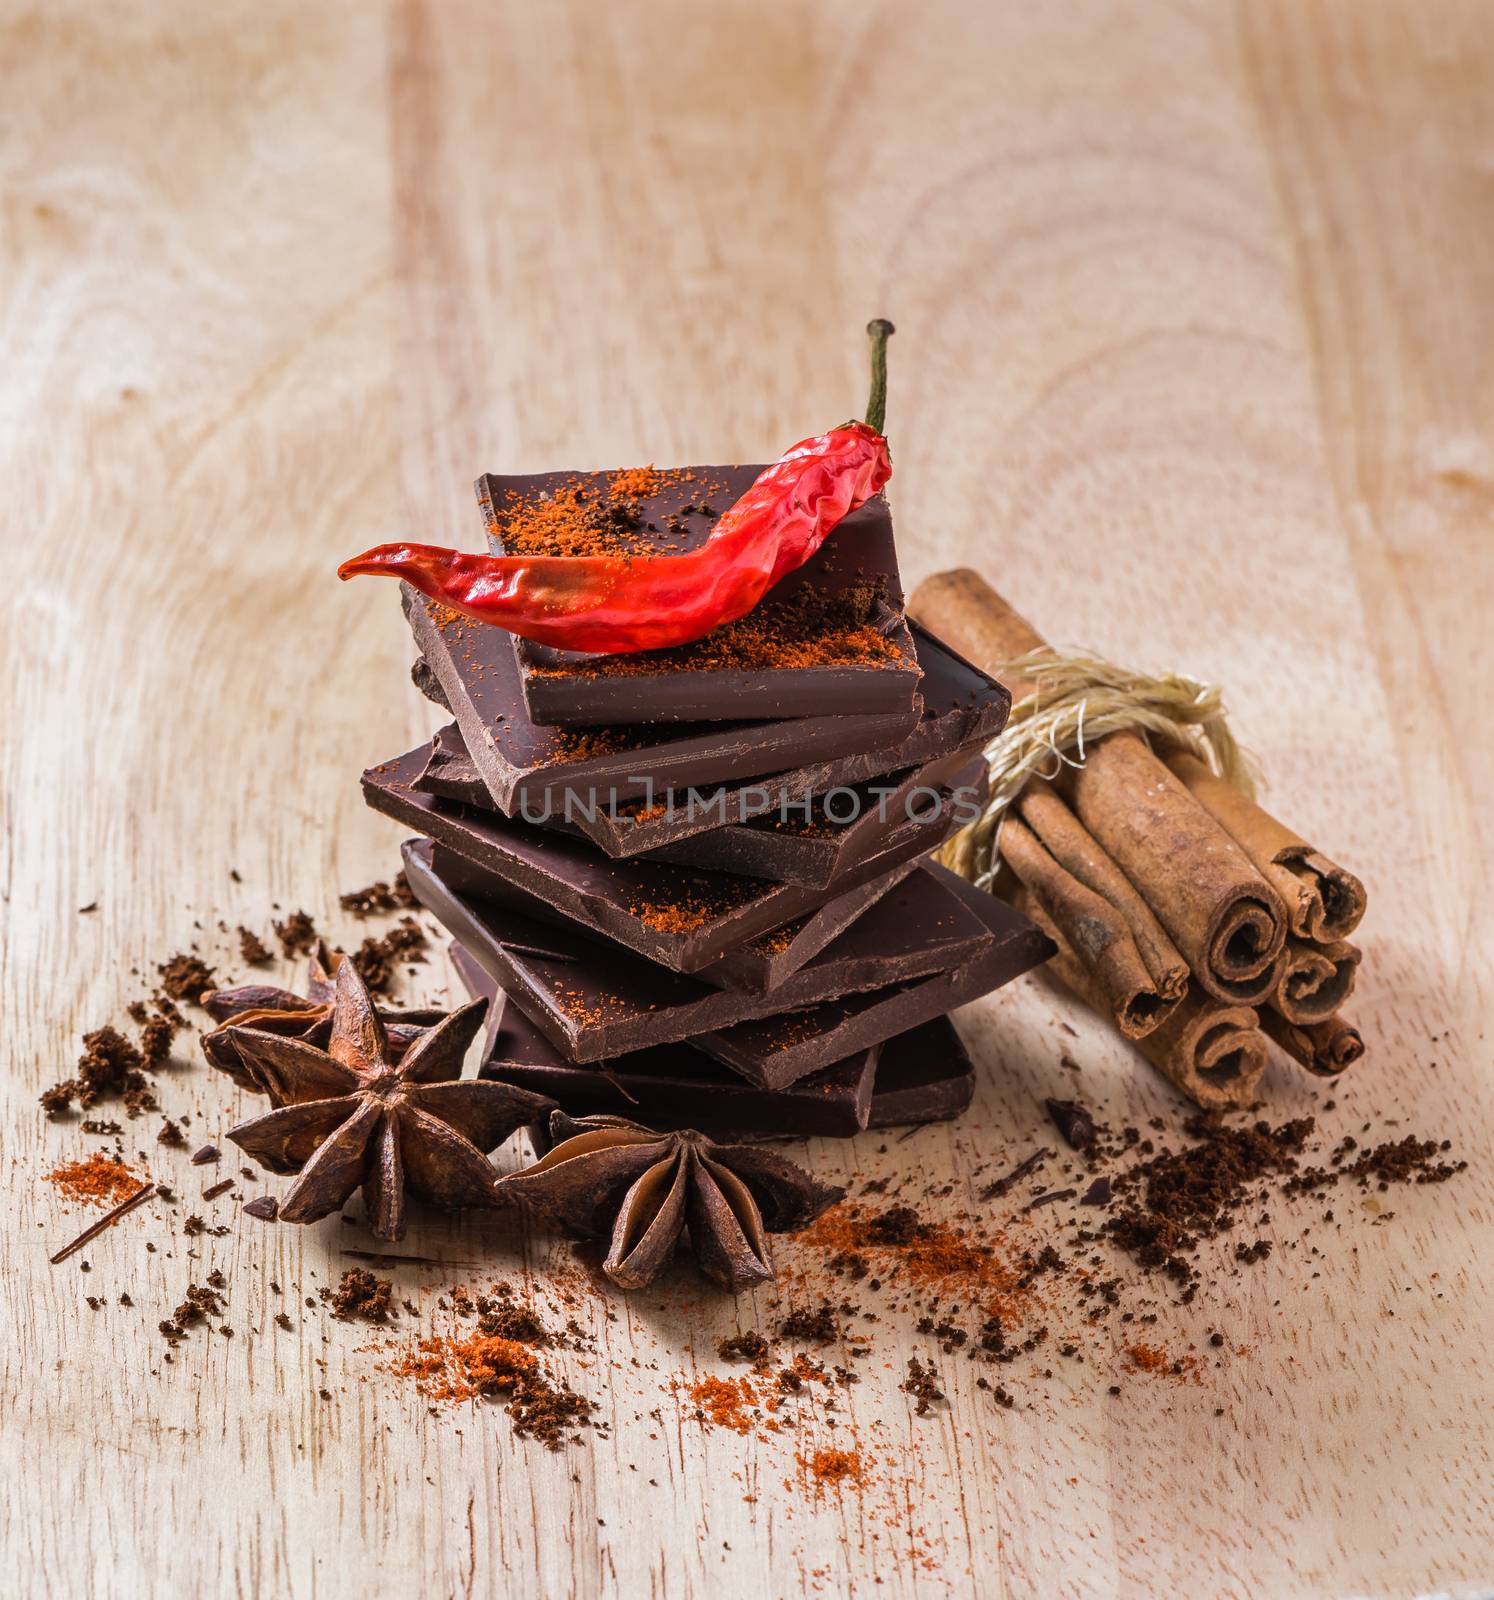 Red Chili Pepper, Chocolate and other Condiment by Seva_blsv